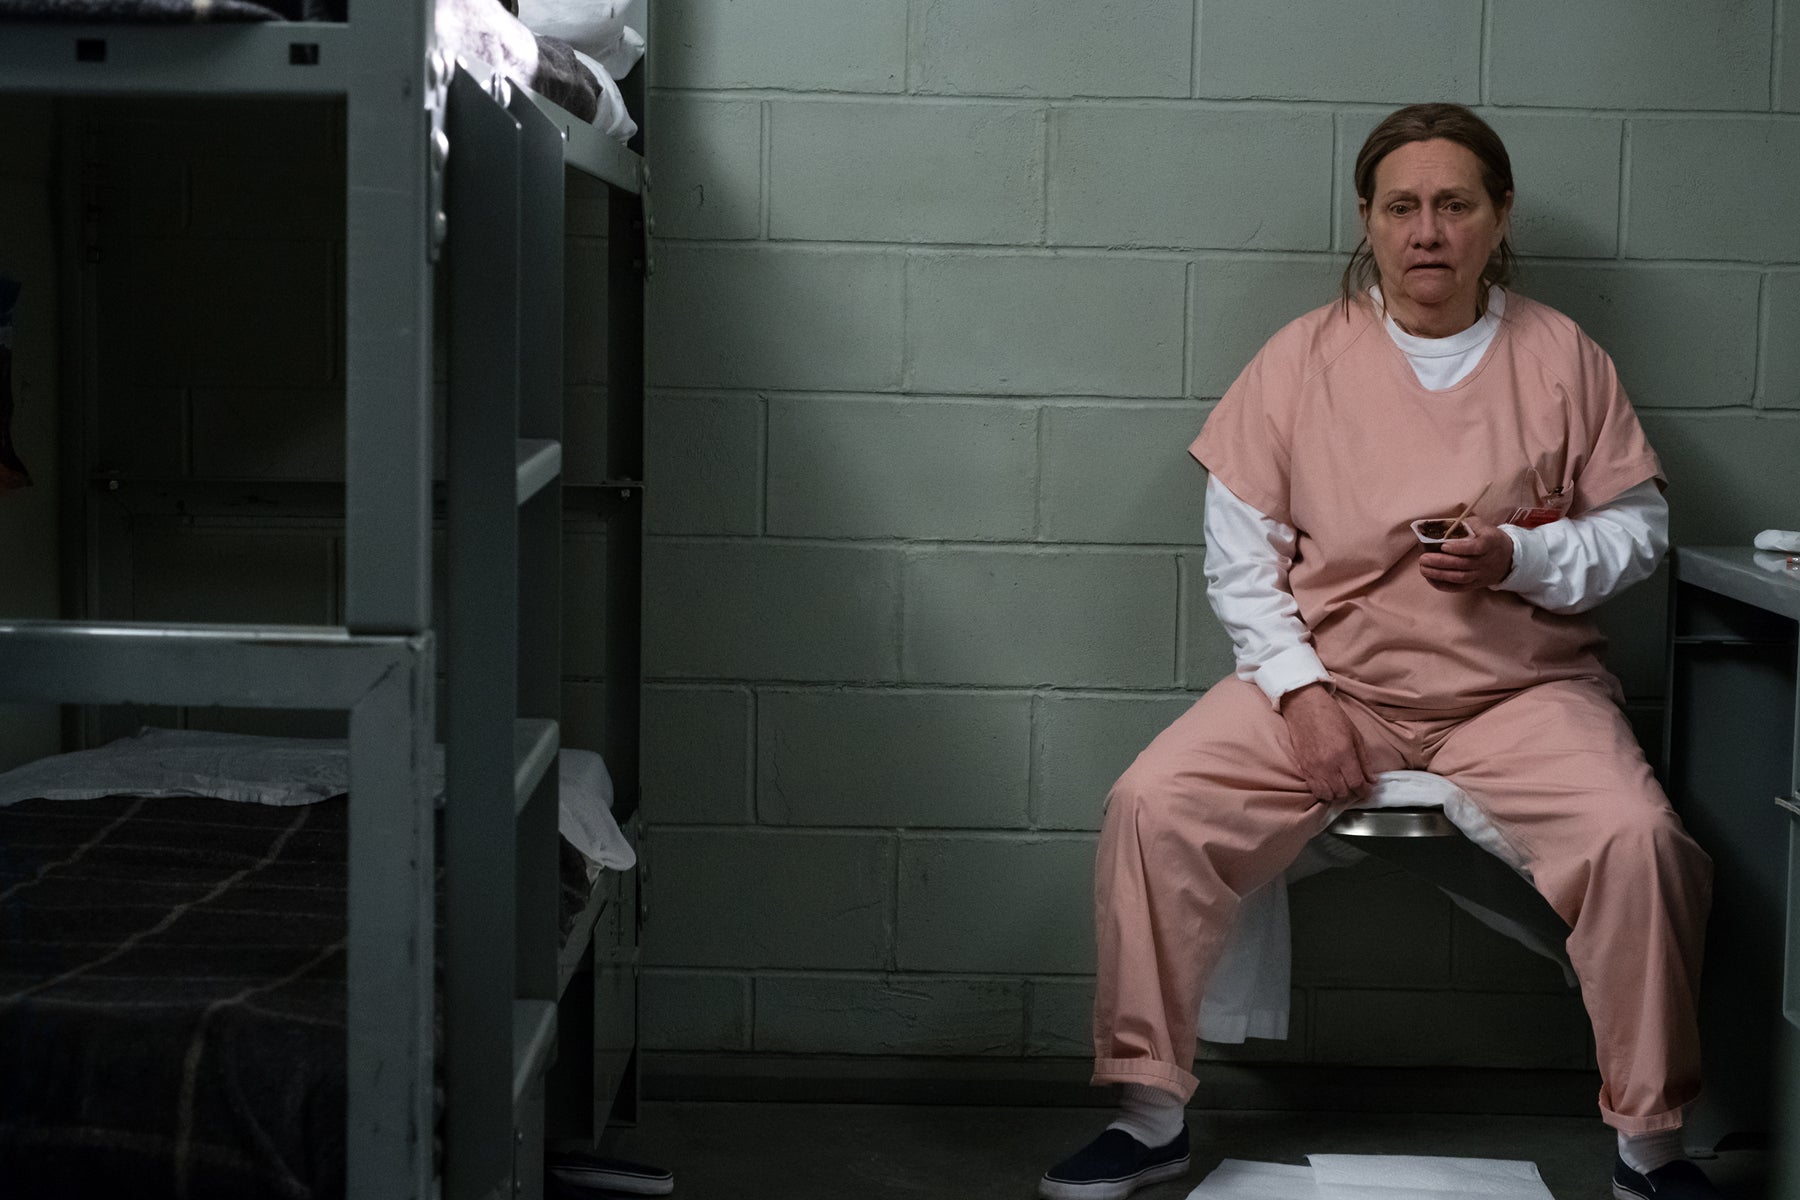 Frieda Berlin sits alone in a prison cell in an episode of Orange Is the New Black.